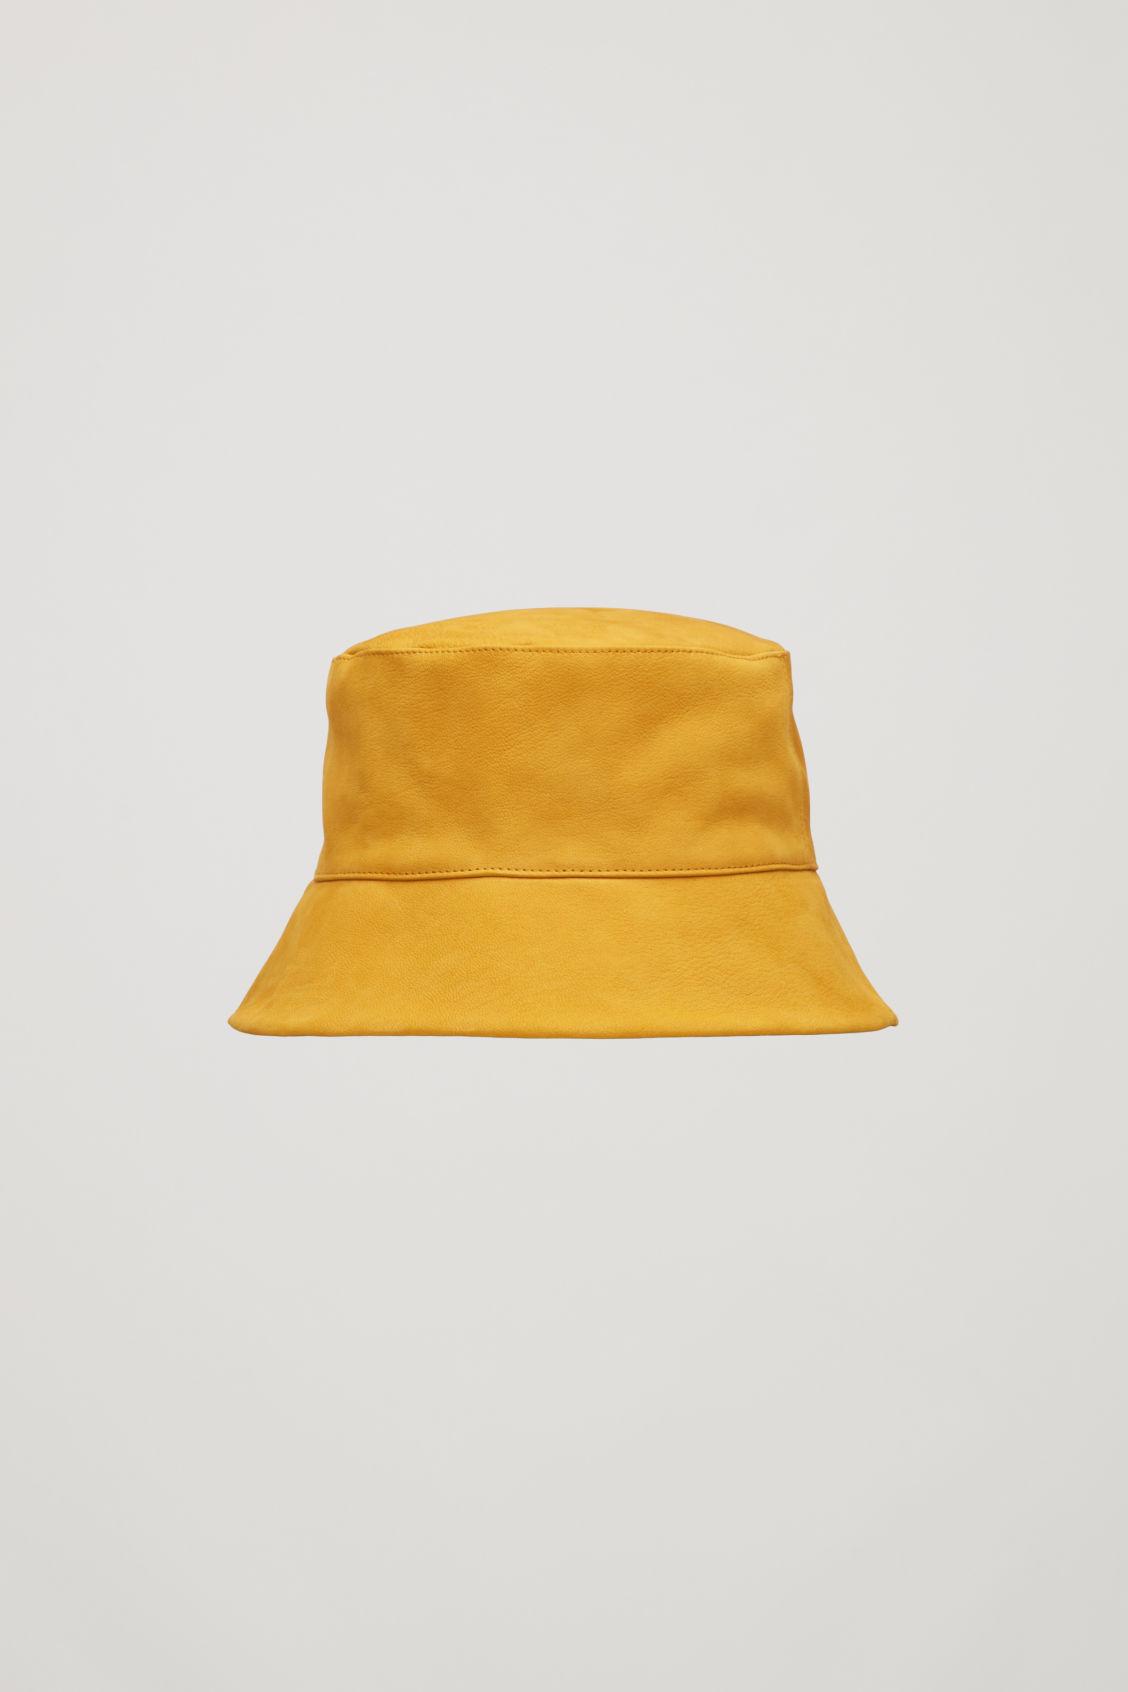 COS Nubuck Leather Bucket Hat in Yellow - Lyst